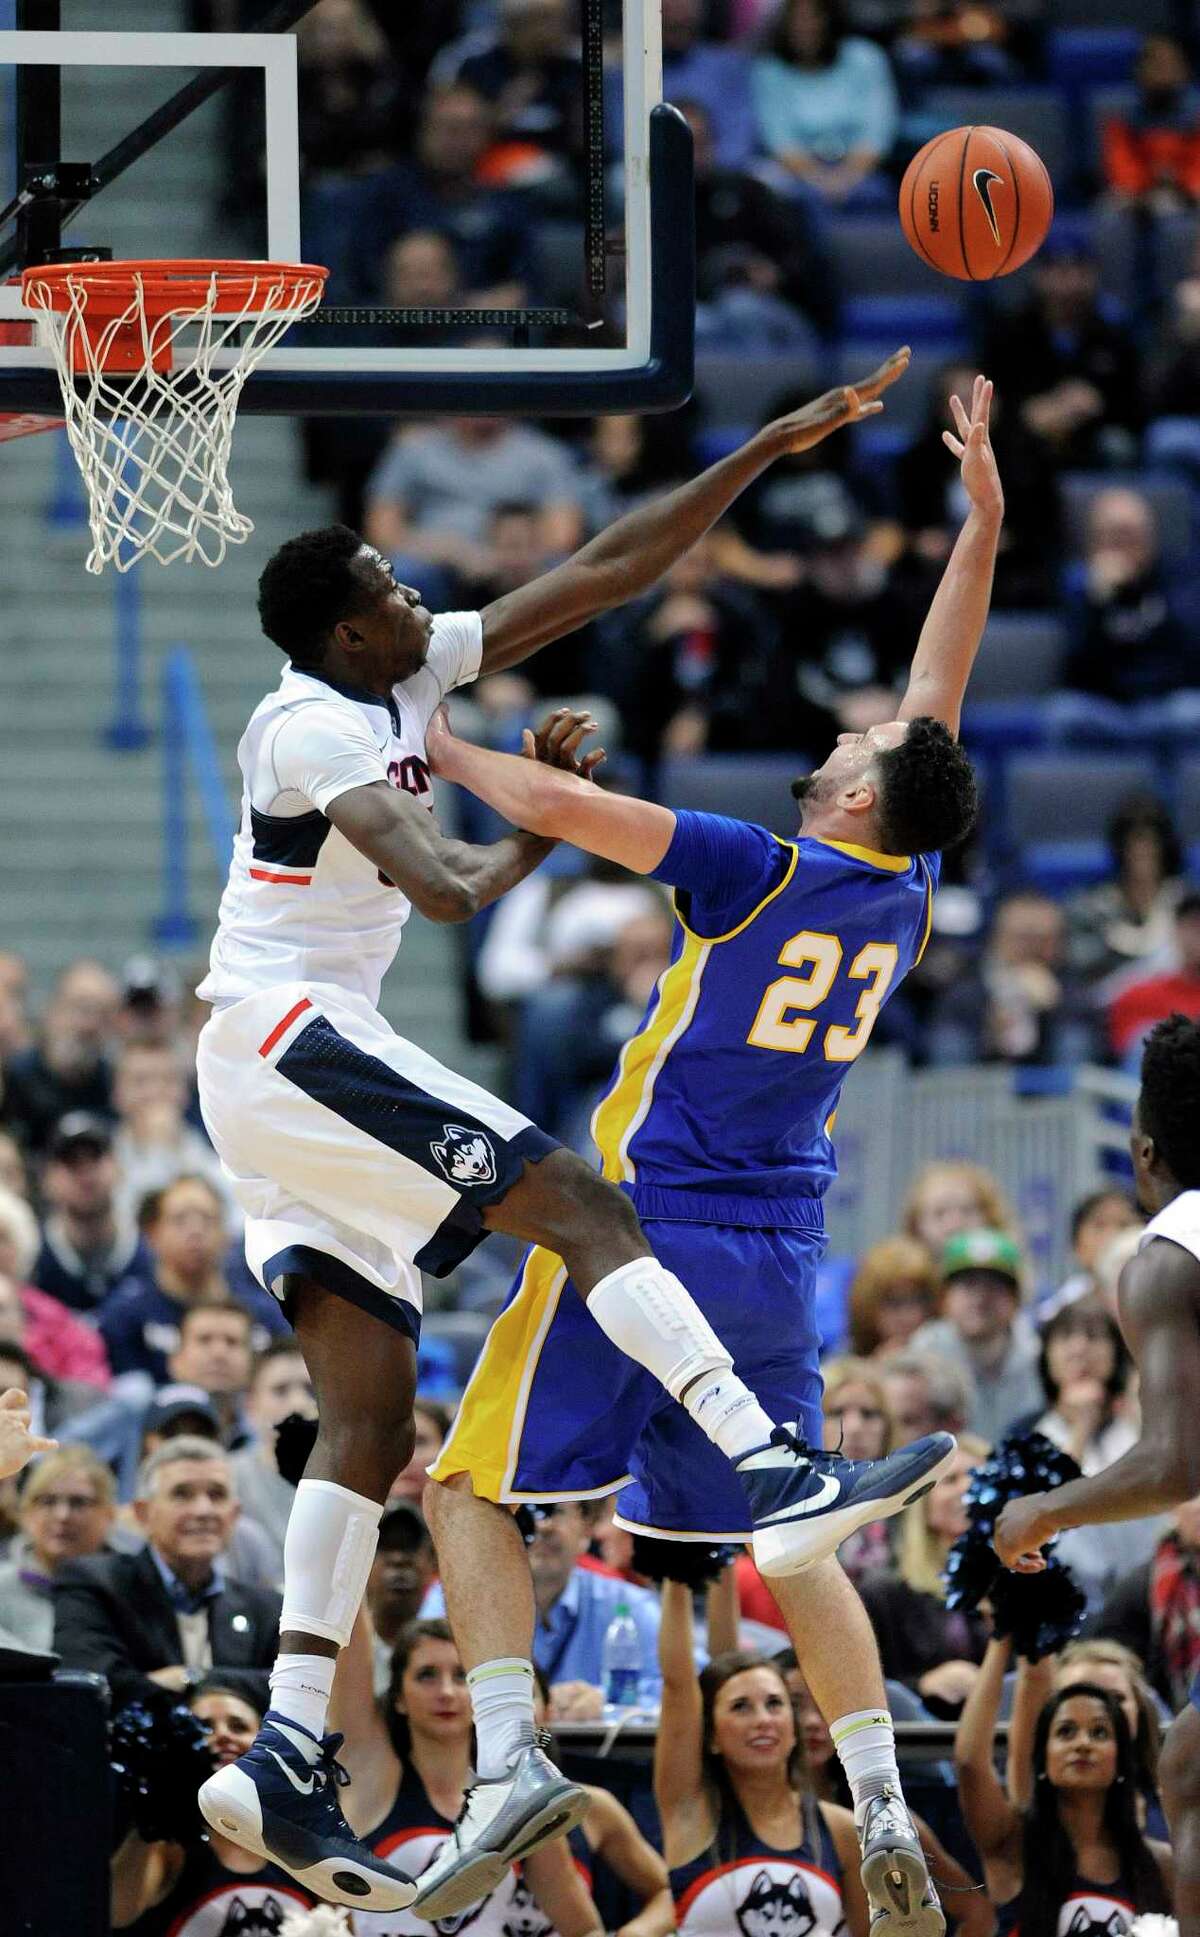 Connecticut's Amida Brimah (35) blocks the shot of New Haven's Joshua Guddemi (23) during the first half of an NCAA college basketball exhibition game in Hartford, Conn., on Saturday, Nov. 7, 2015. (AP Photo/Fred Beckham)